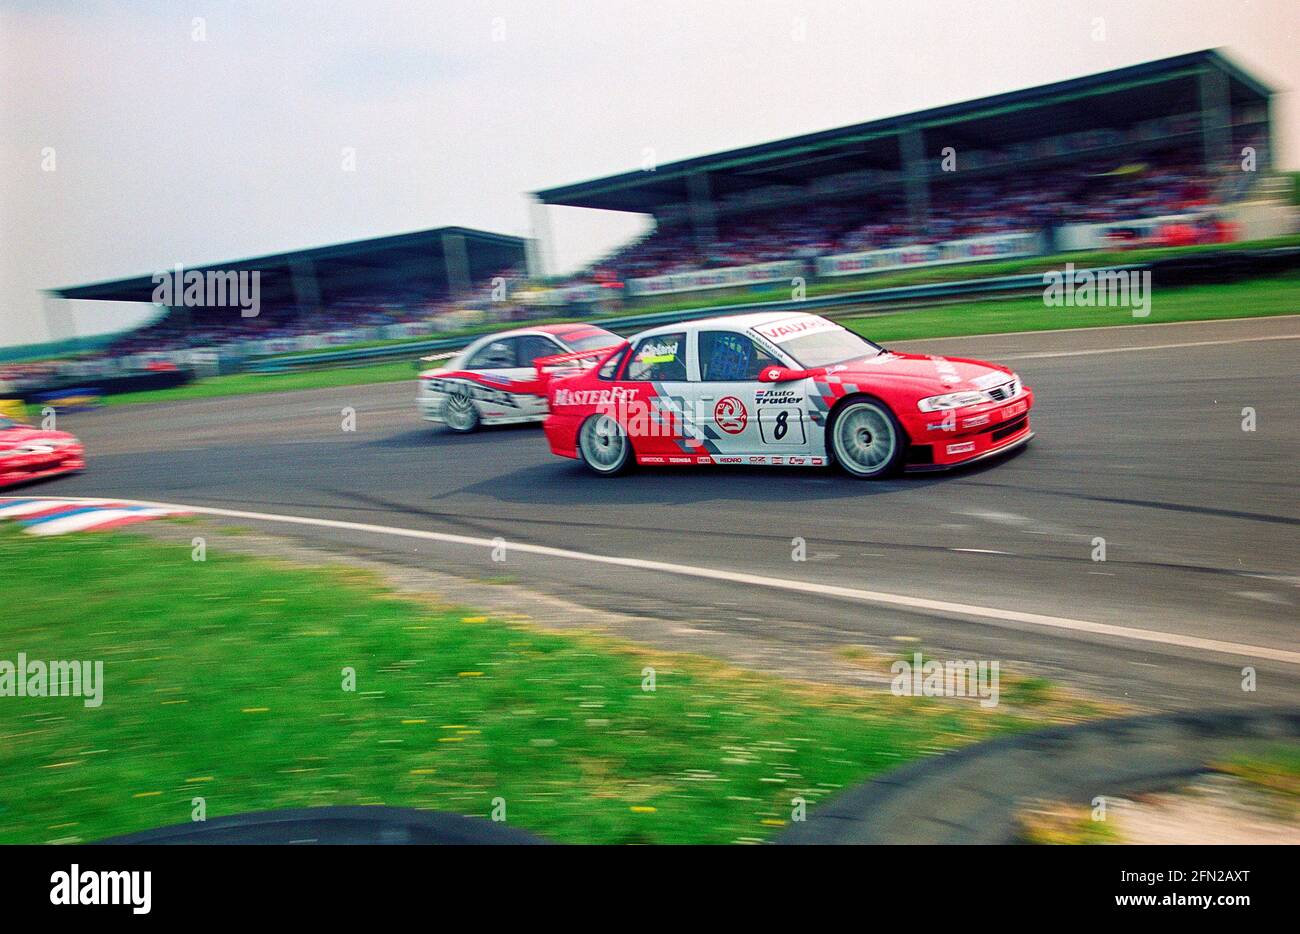 John Cleland exists Club Chicane at Thruxton motor circuit during the British Touring cars championship in 1999 in his Vectra Vauxhall. Stock Photo